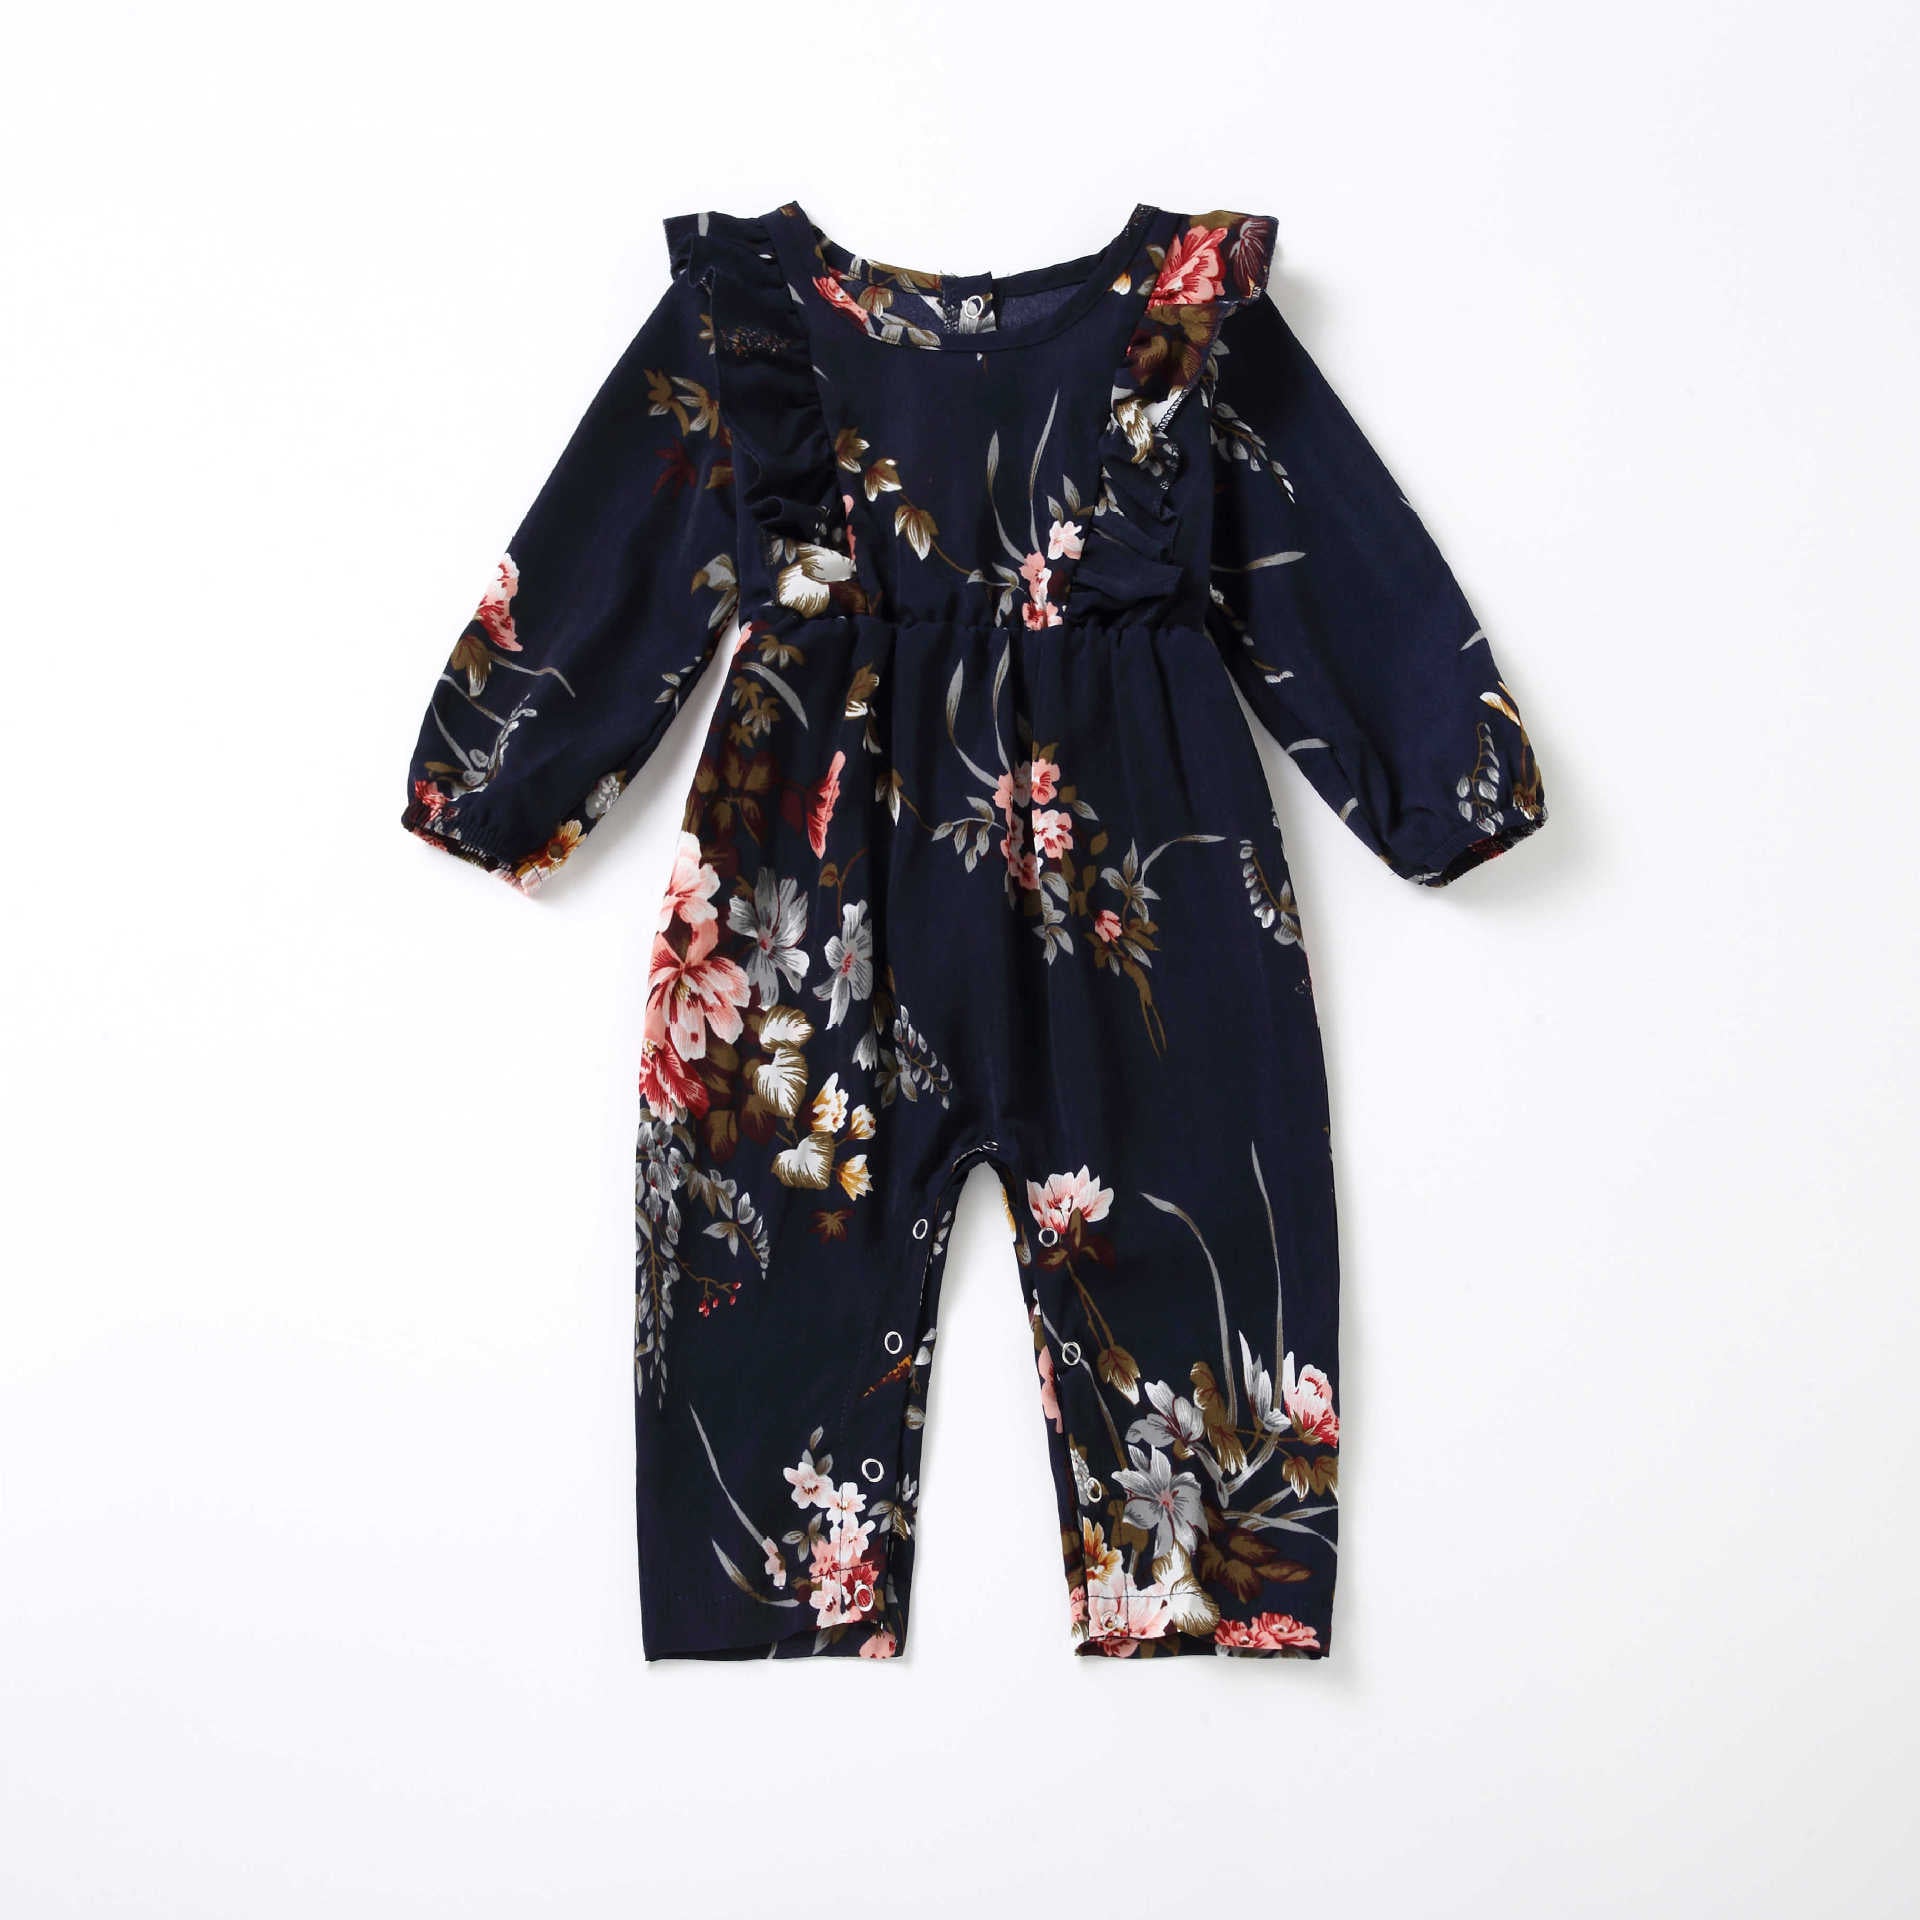 Stitching printing parent-child sling lace-up waist jumpsuit for Mom and Me